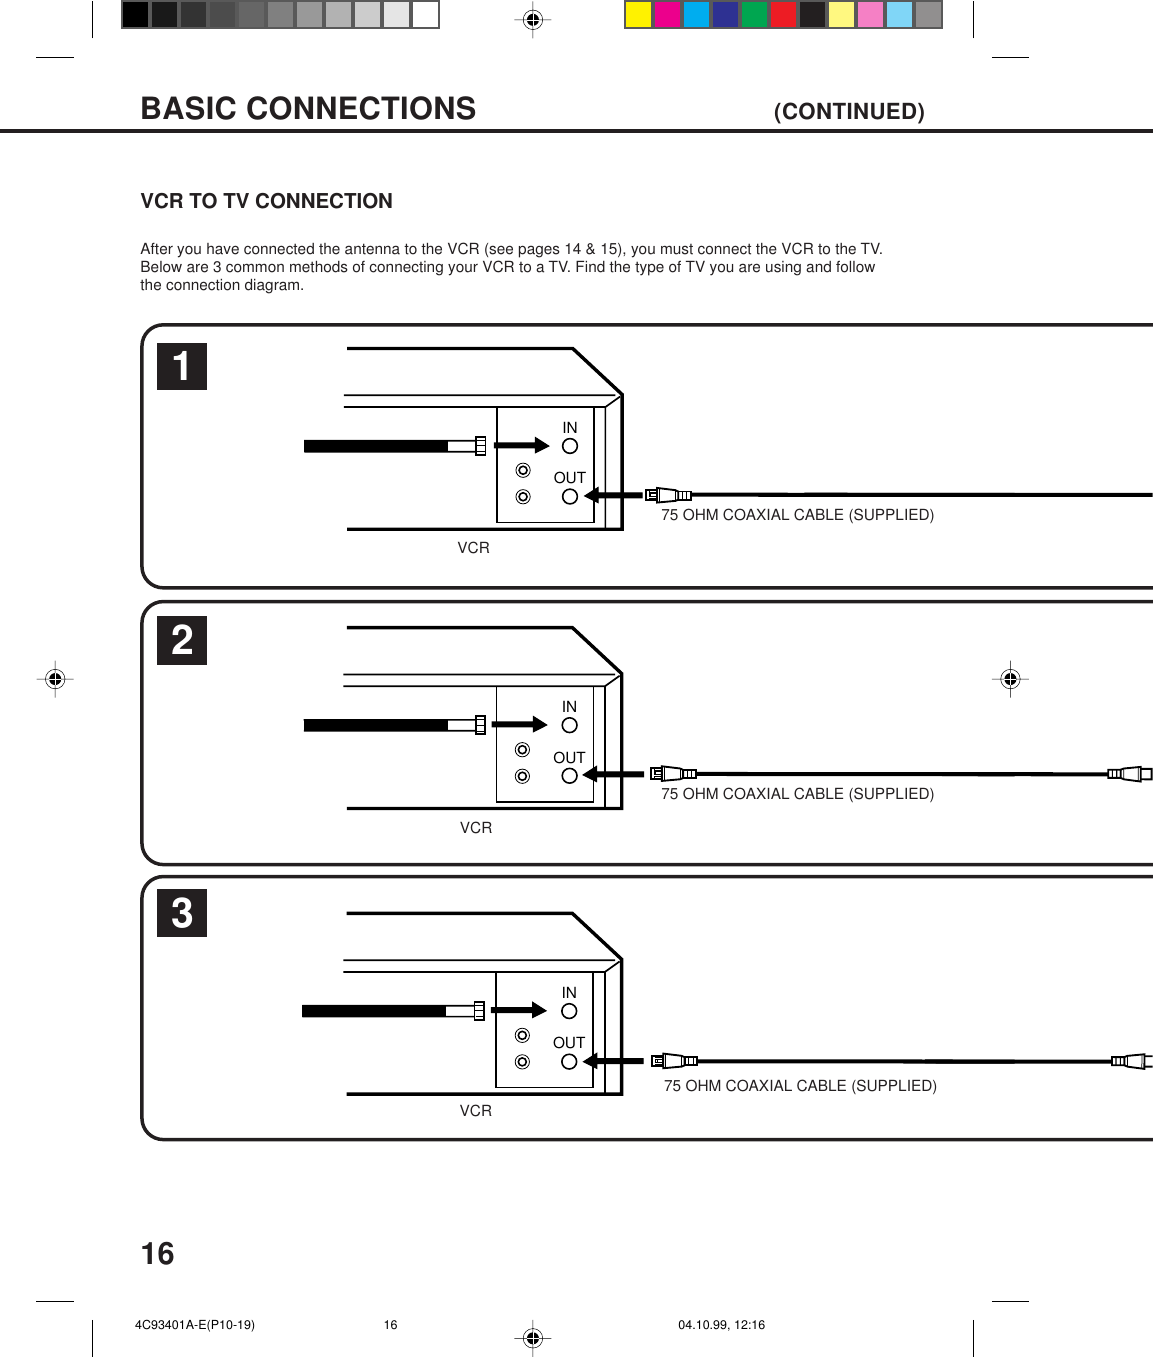 16OUTINOUTINOUTINVCR TO TV CONNECTIONAfter you have connected the antenna to the VCR (see pages 14 &amp; 15), you must connect the VCR to the TV.Below are 3 common methods of connecting your VCR to a TV. Find the type of TV you are using and followthe connection diagram.213BASIC CONNECTIONS  (CONTINUED)VCRVCRVCR75 OHM COAXIAL CABLE (SUPPLIED)75 OHM COAXIAL CABLE (SUPPLIED)75 OHM COAXIAL CABLE (SUPPLIED)    4C93401A-E(P10-19) 04.10.99, 12:1616